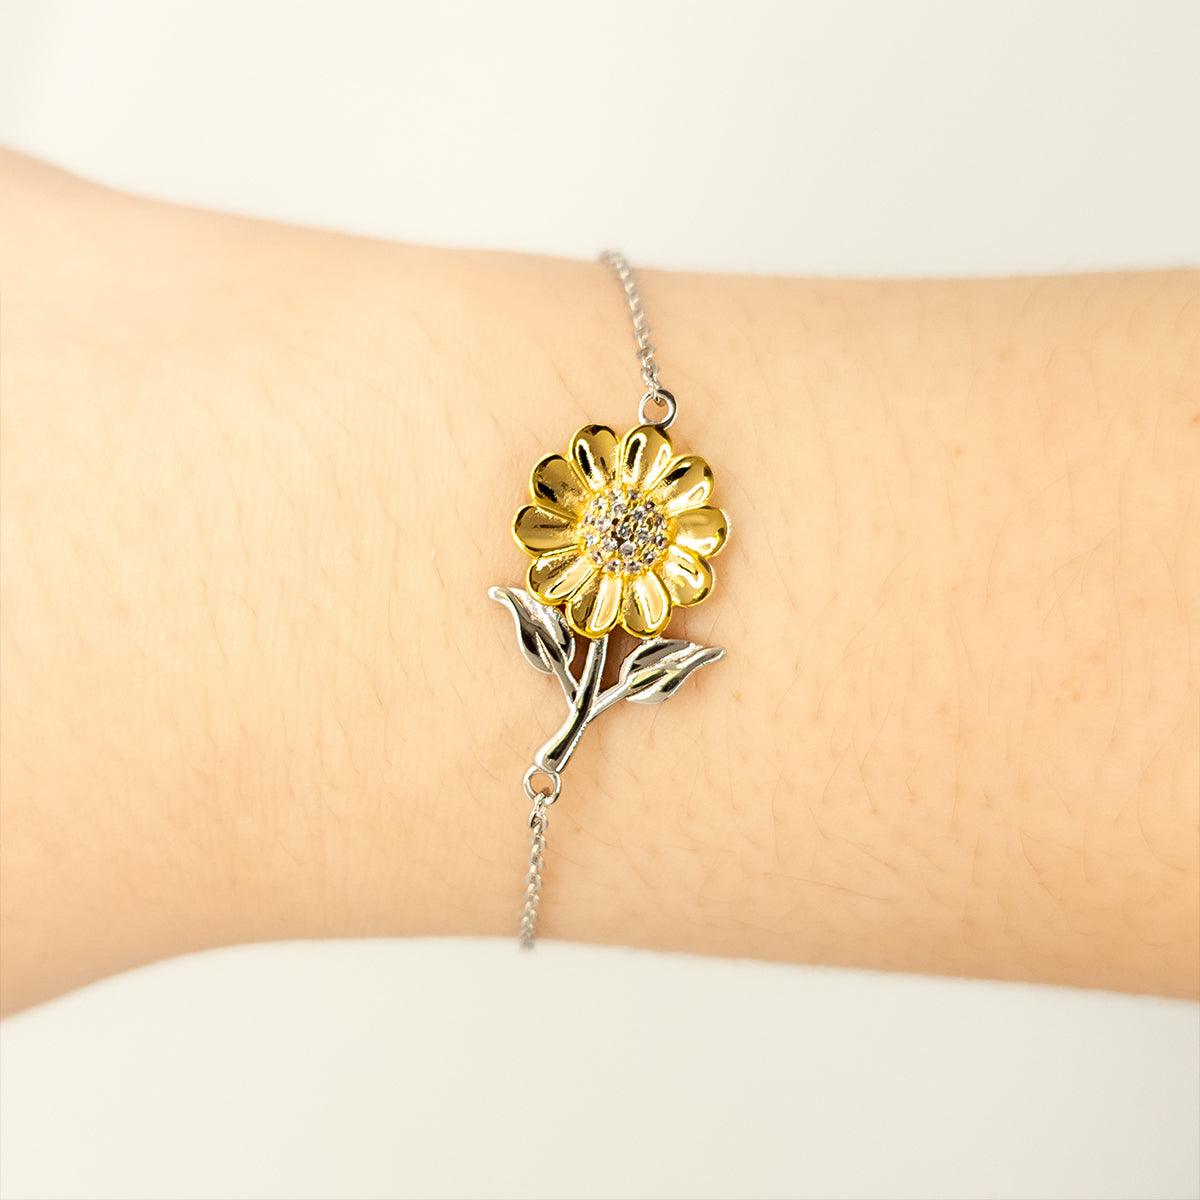 Landscape Designer Sunflower Bracelet - Thanks for being who you are - Birthday Christmas Jewelry Gifts Coworkers Colleague Boss - Mallard Moon Gift Shop